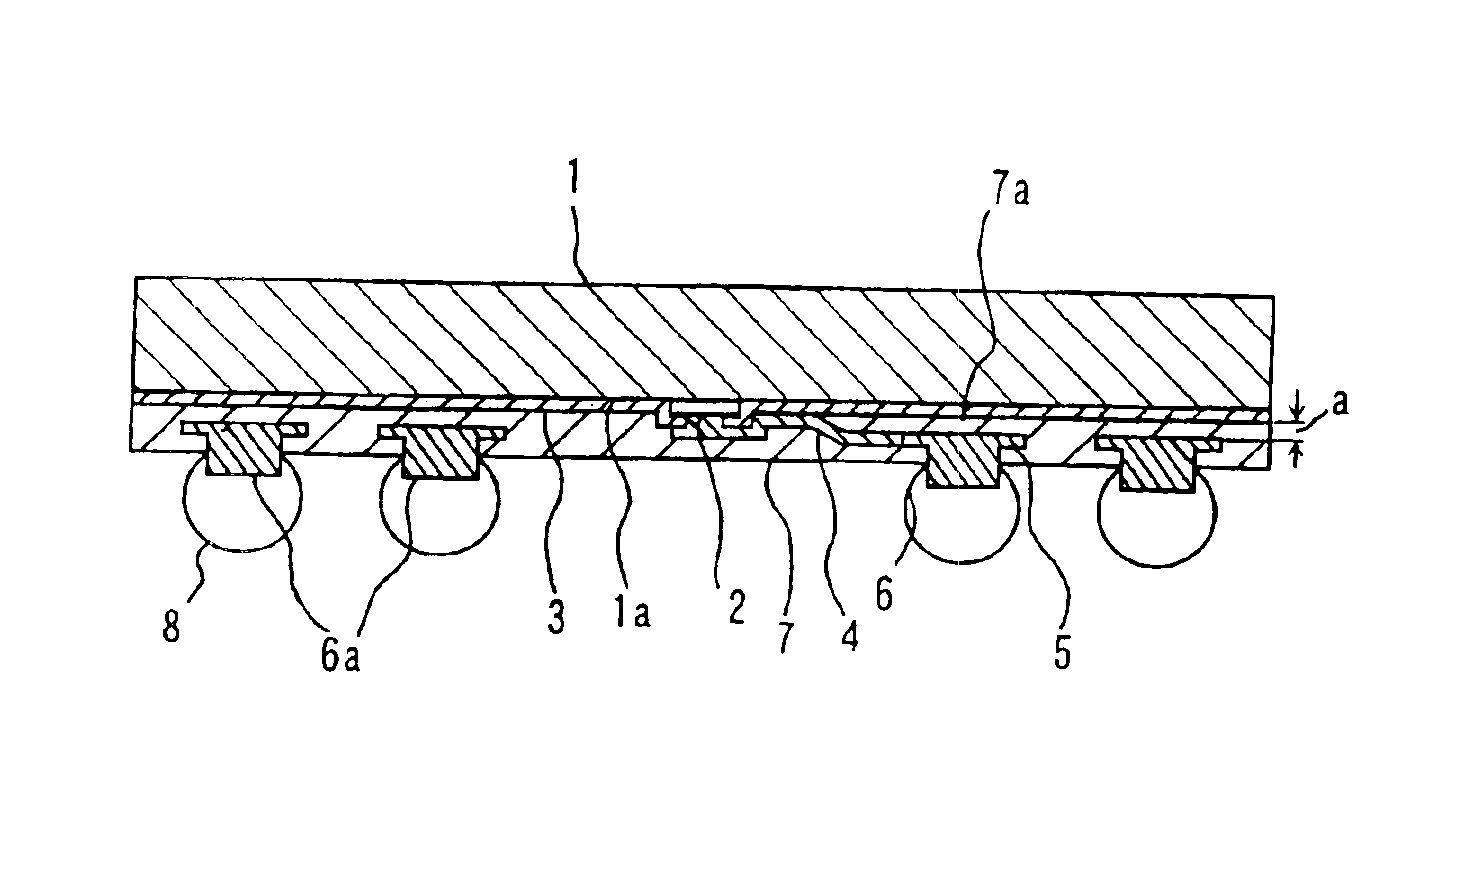 Semiconductor device provided with rewiring layer